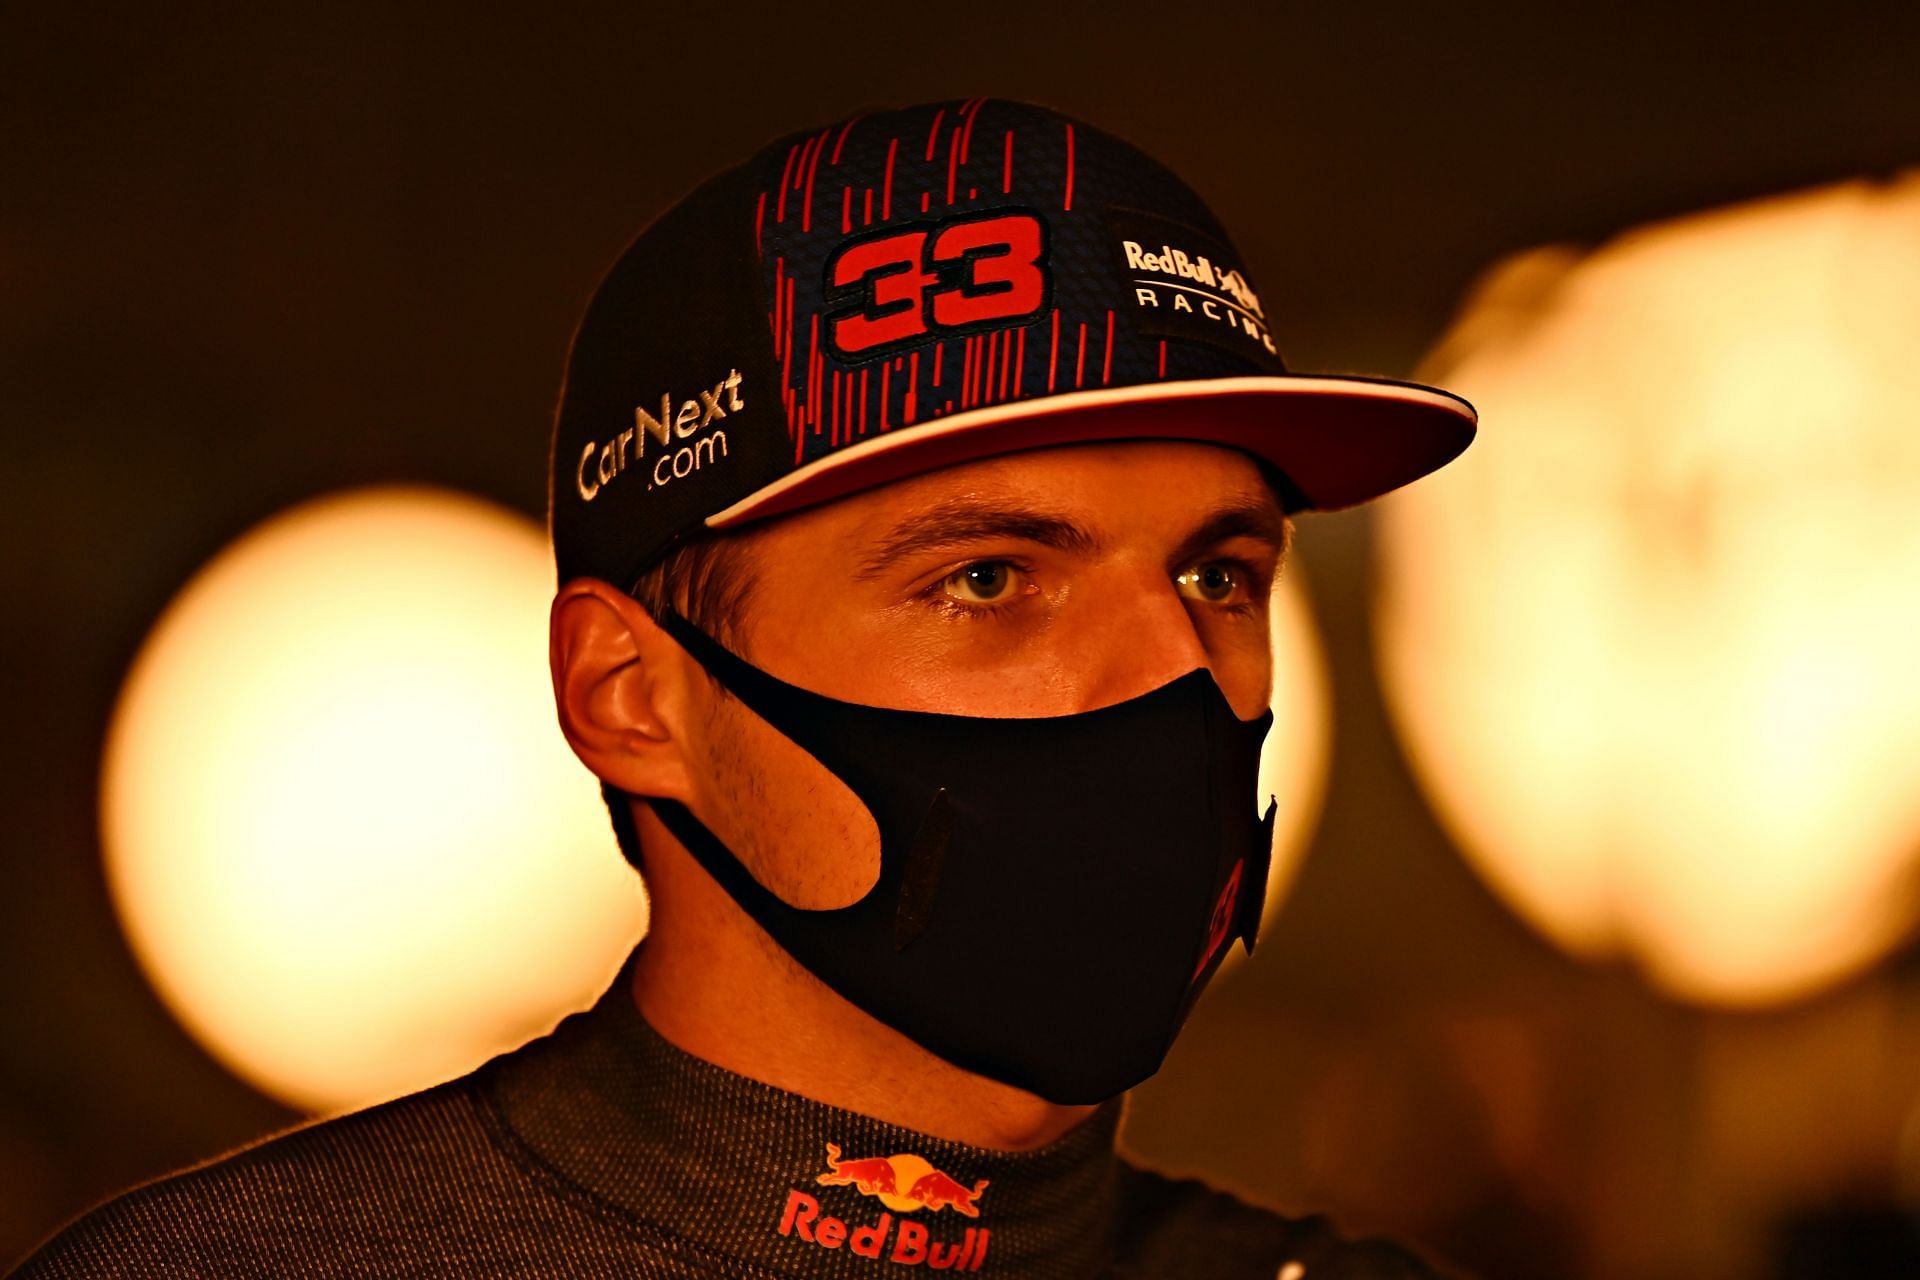 Second place qualifier Max Verstappen talks to the media in the paddock after qualifying ahead of the 2021 Qatar GP.